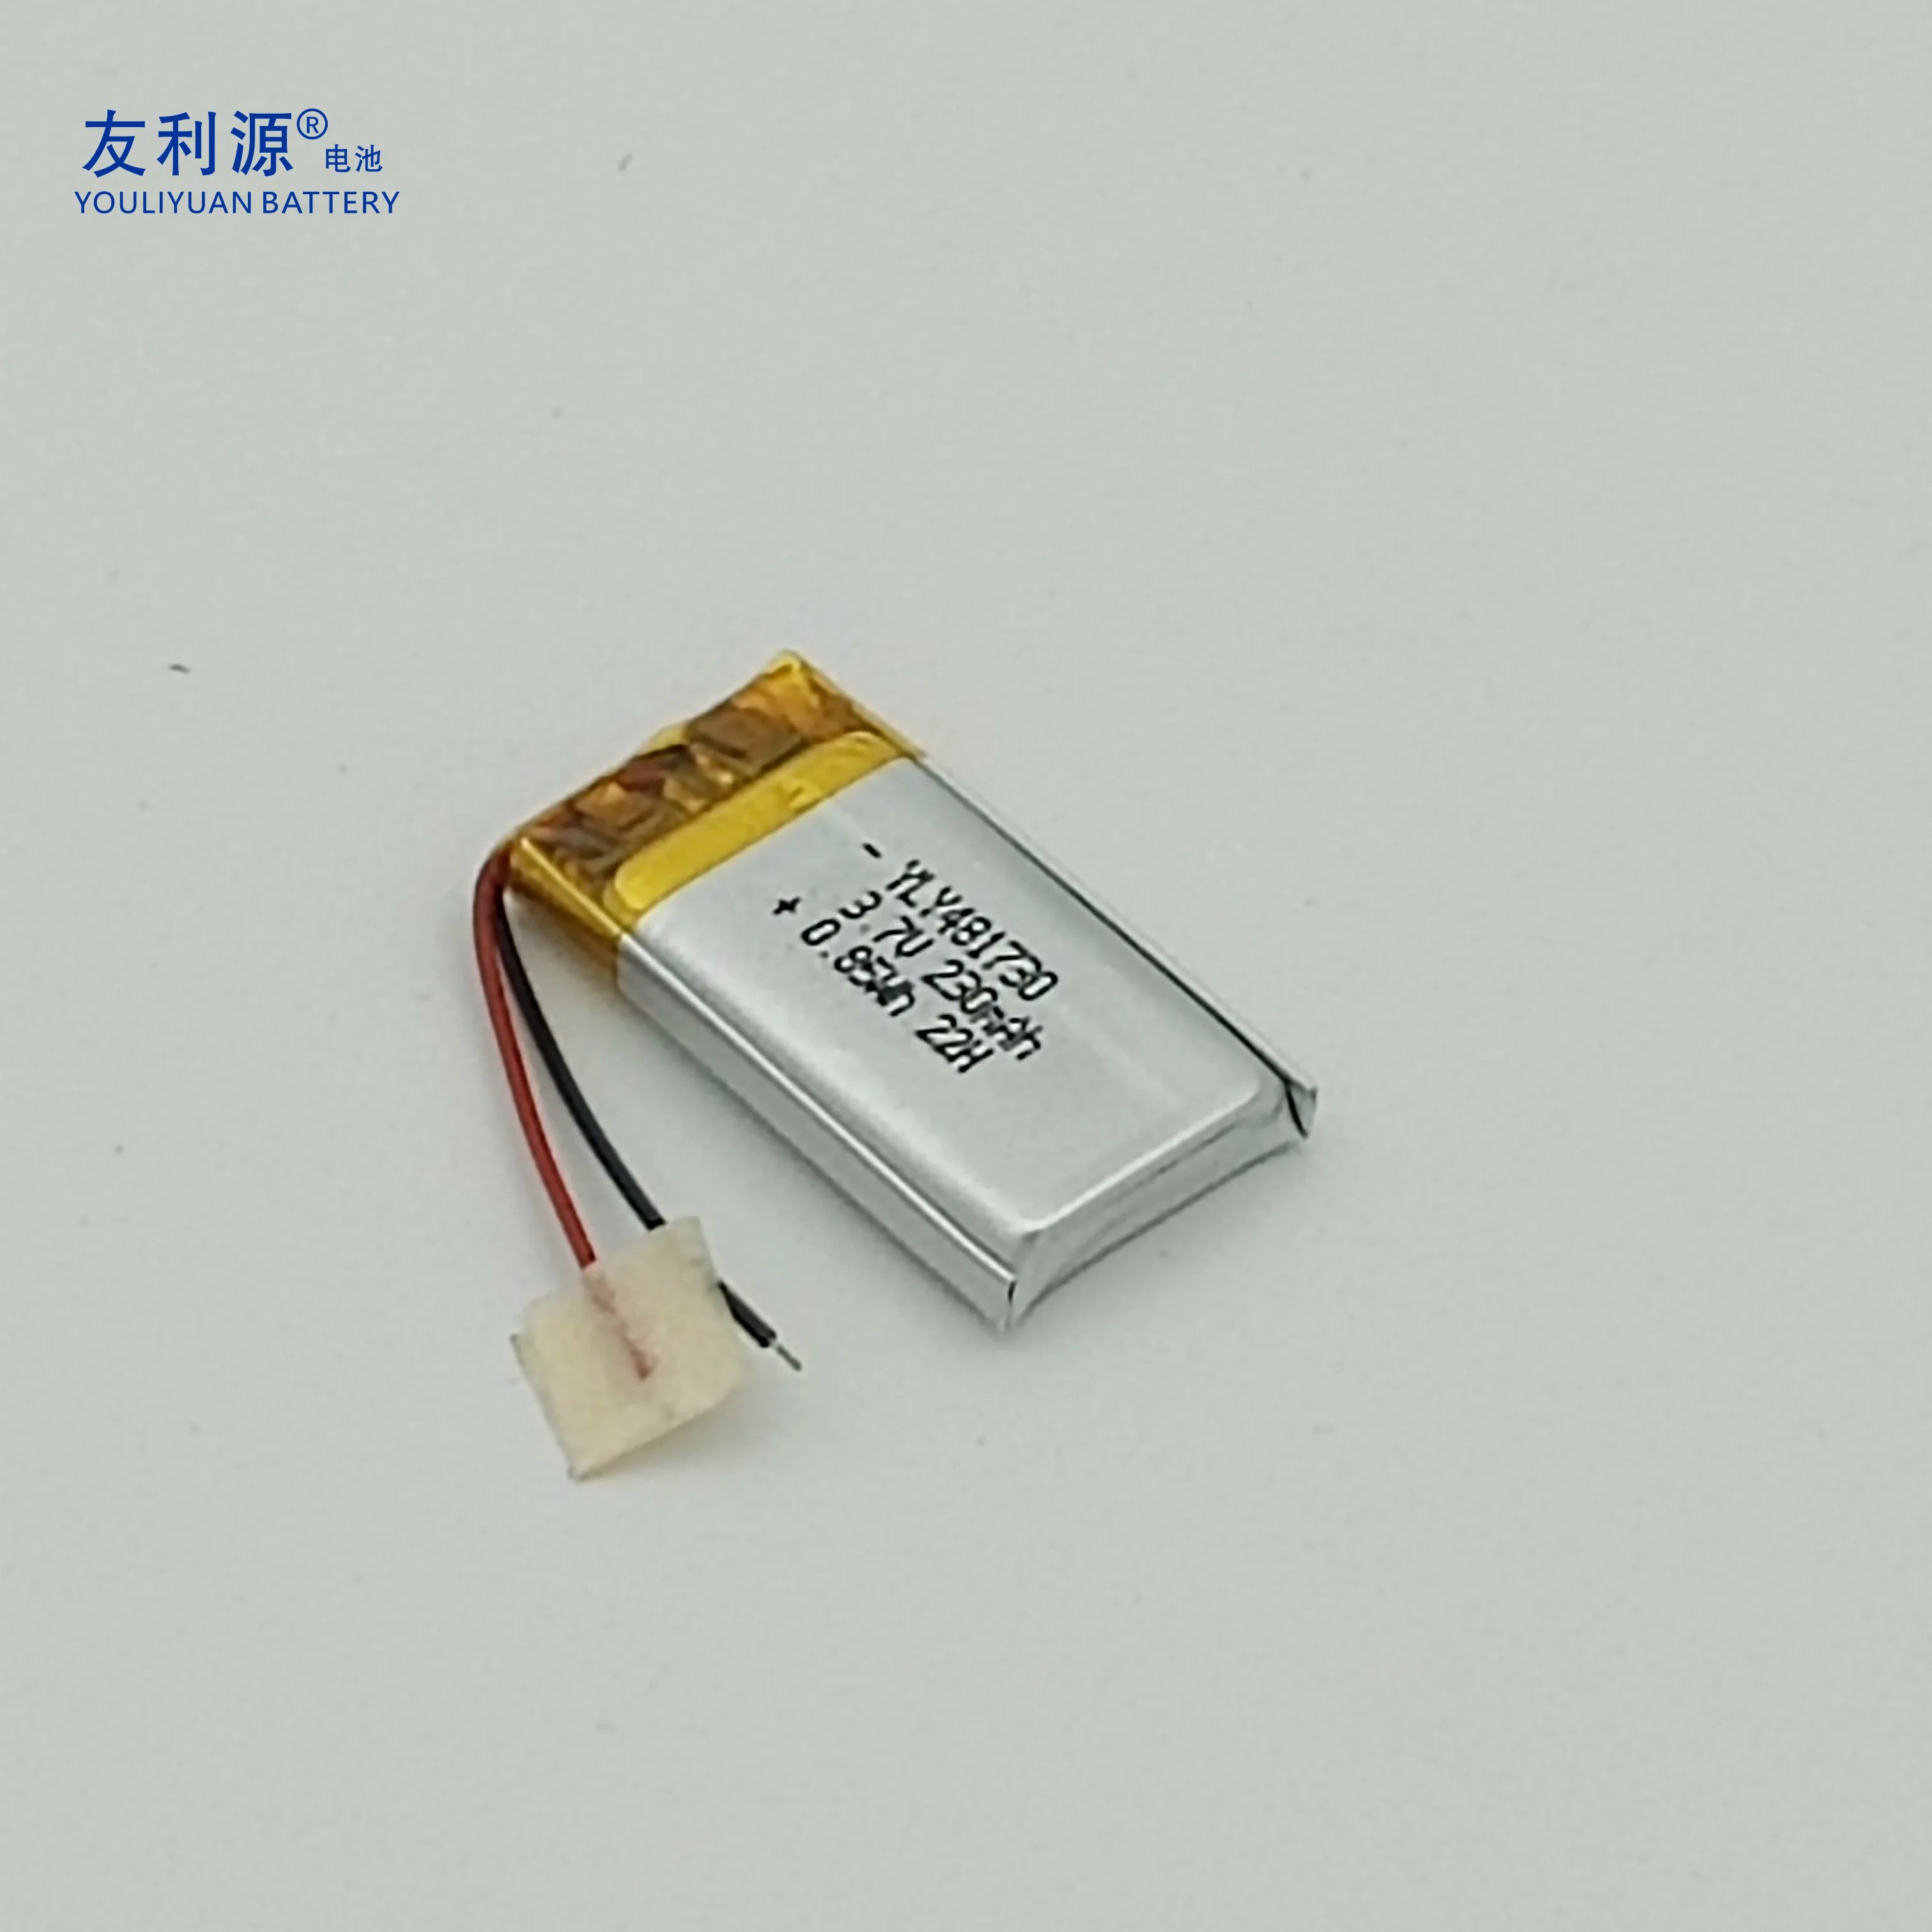 OEM ODM Factory Rechargeable Lipo Battery 481730 3.7V 230mAh Mini Lithium Polymer Battery for Bluetooth Earphone/Water Repienisher